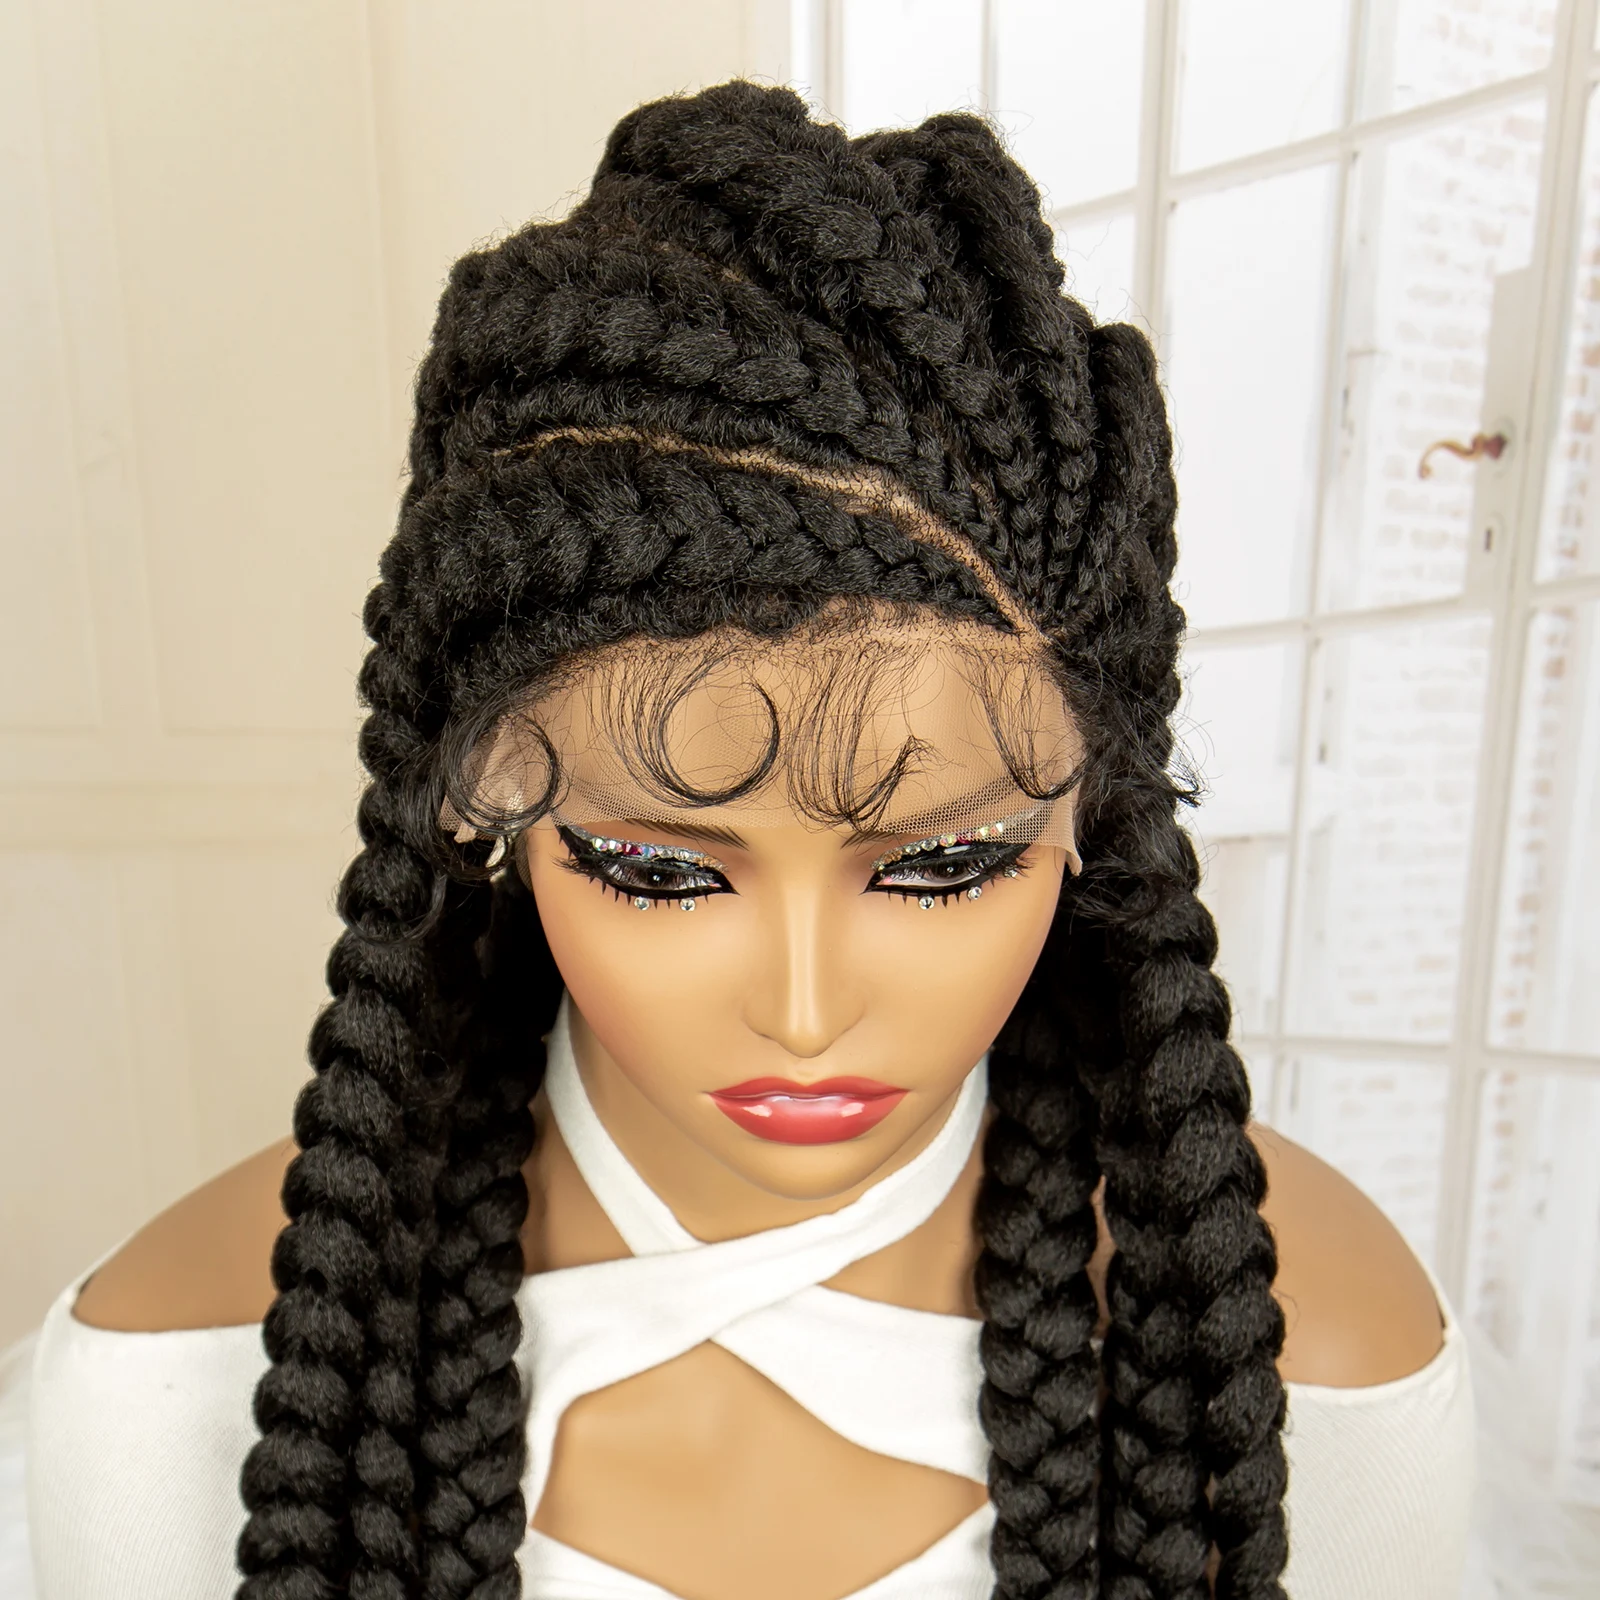 36 inches Synthetic Full Lace Wig for Black Women Braided Wig Lace Frontal Glueless Box Braids Wig Women Synthetic Braided